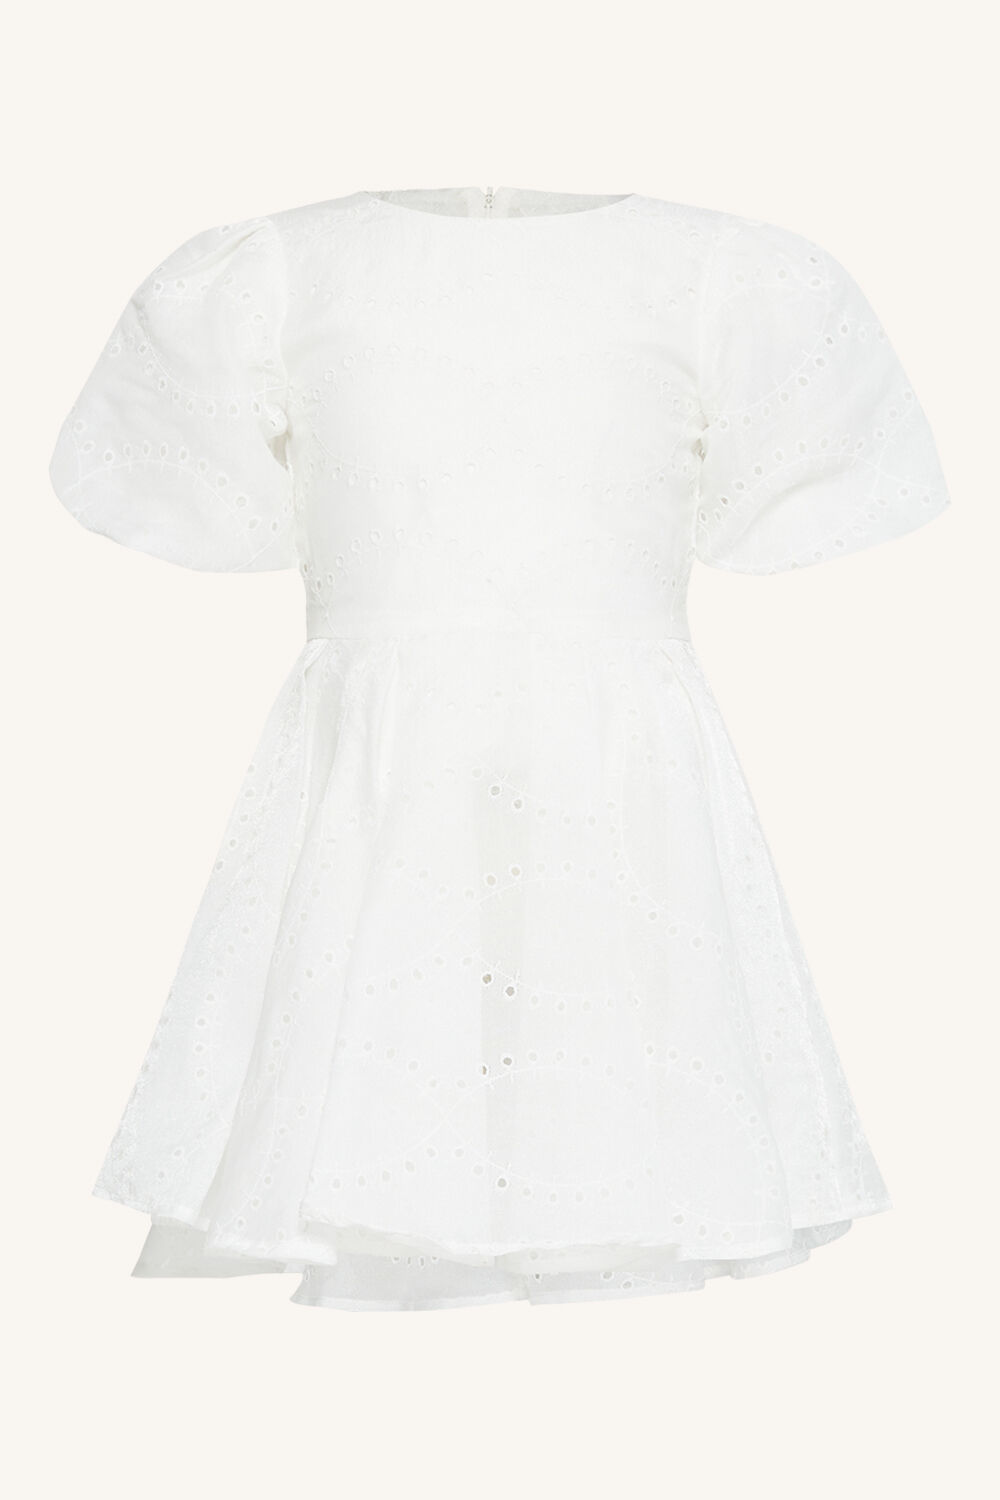 girls rue embroidered dress in ivory in colour CLOUD DANCER